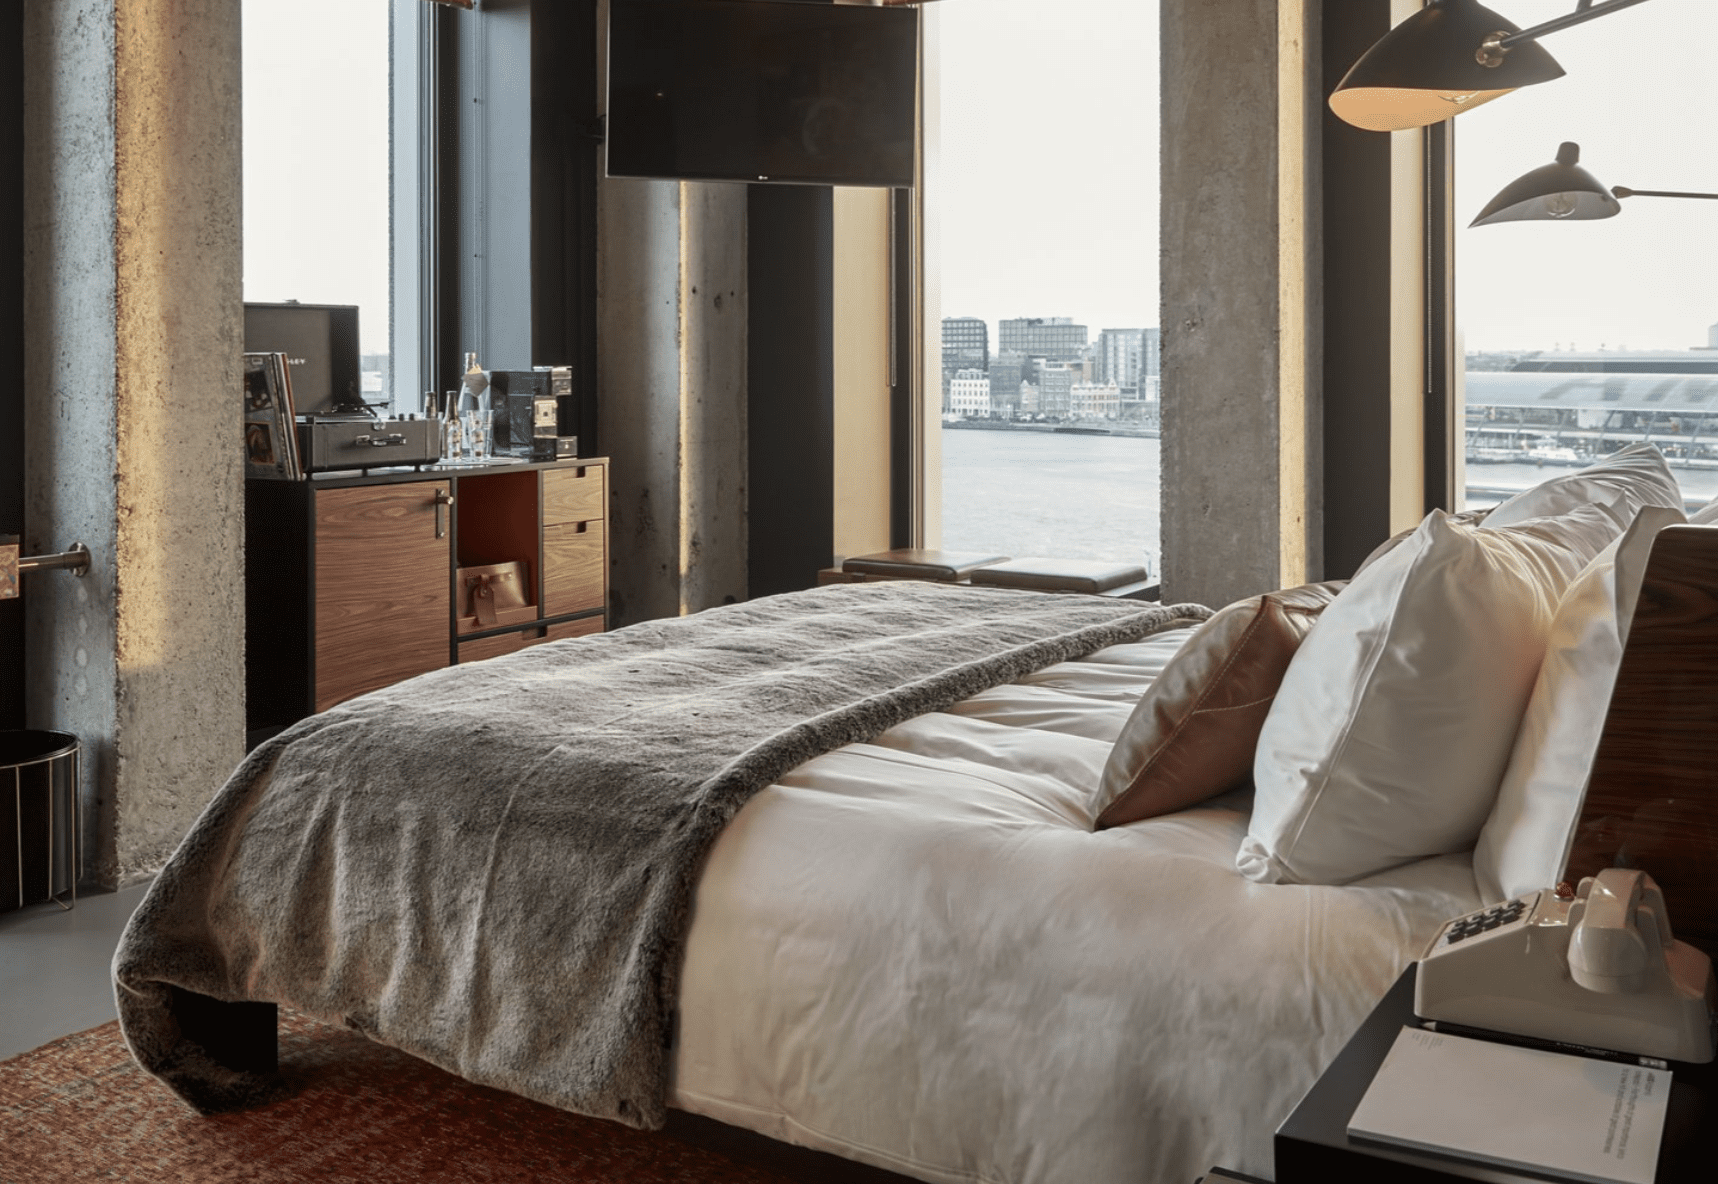 The best hotels in Amsterdam | This Sir Adam Hotel room is lined with cement walls with floor to ceiling windows that overlooks the water.